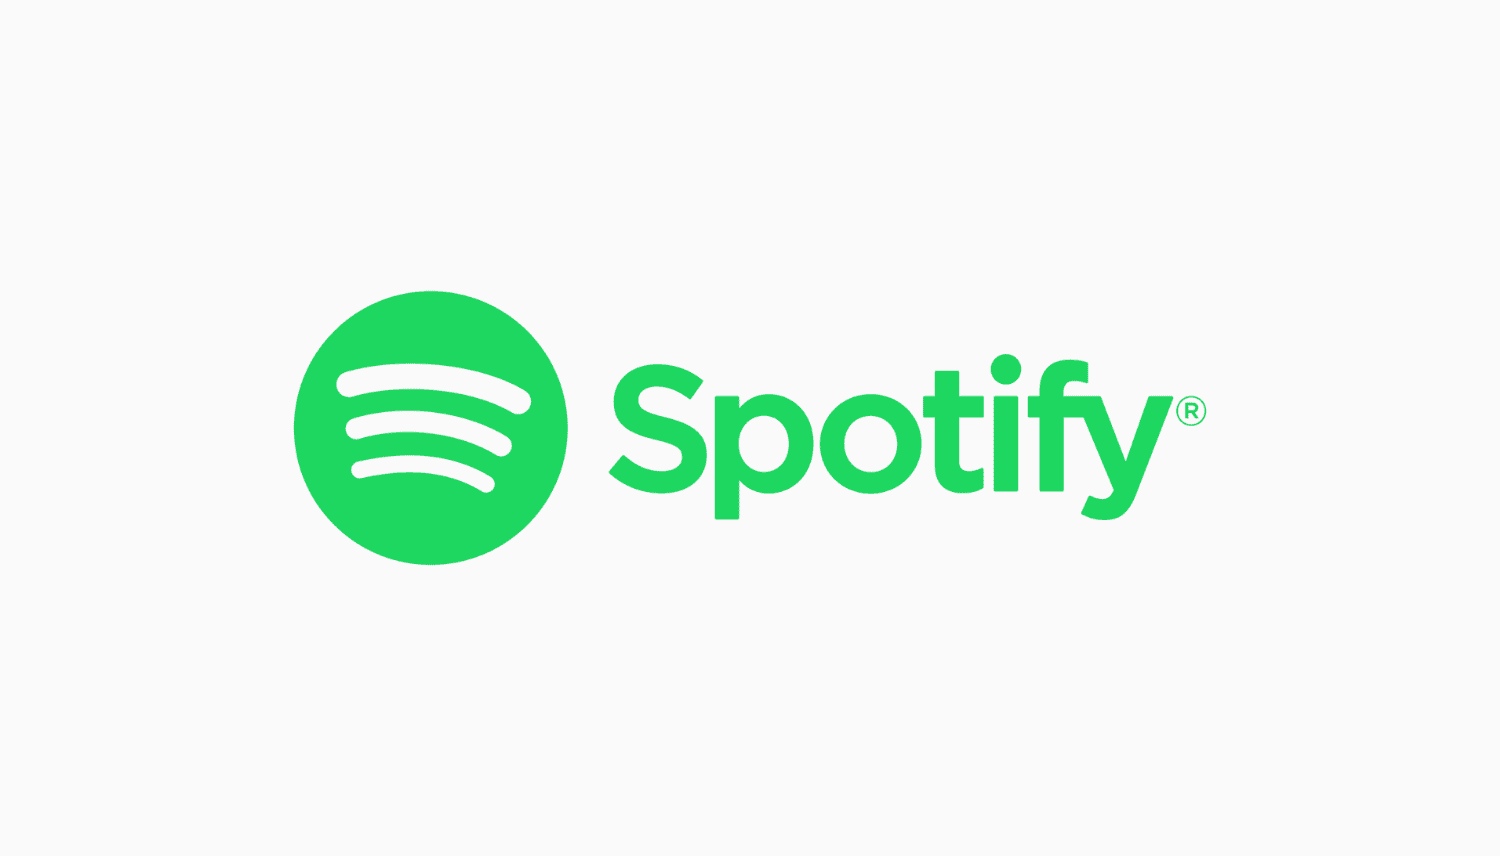 Green Spotify logo and text on a very light gray background